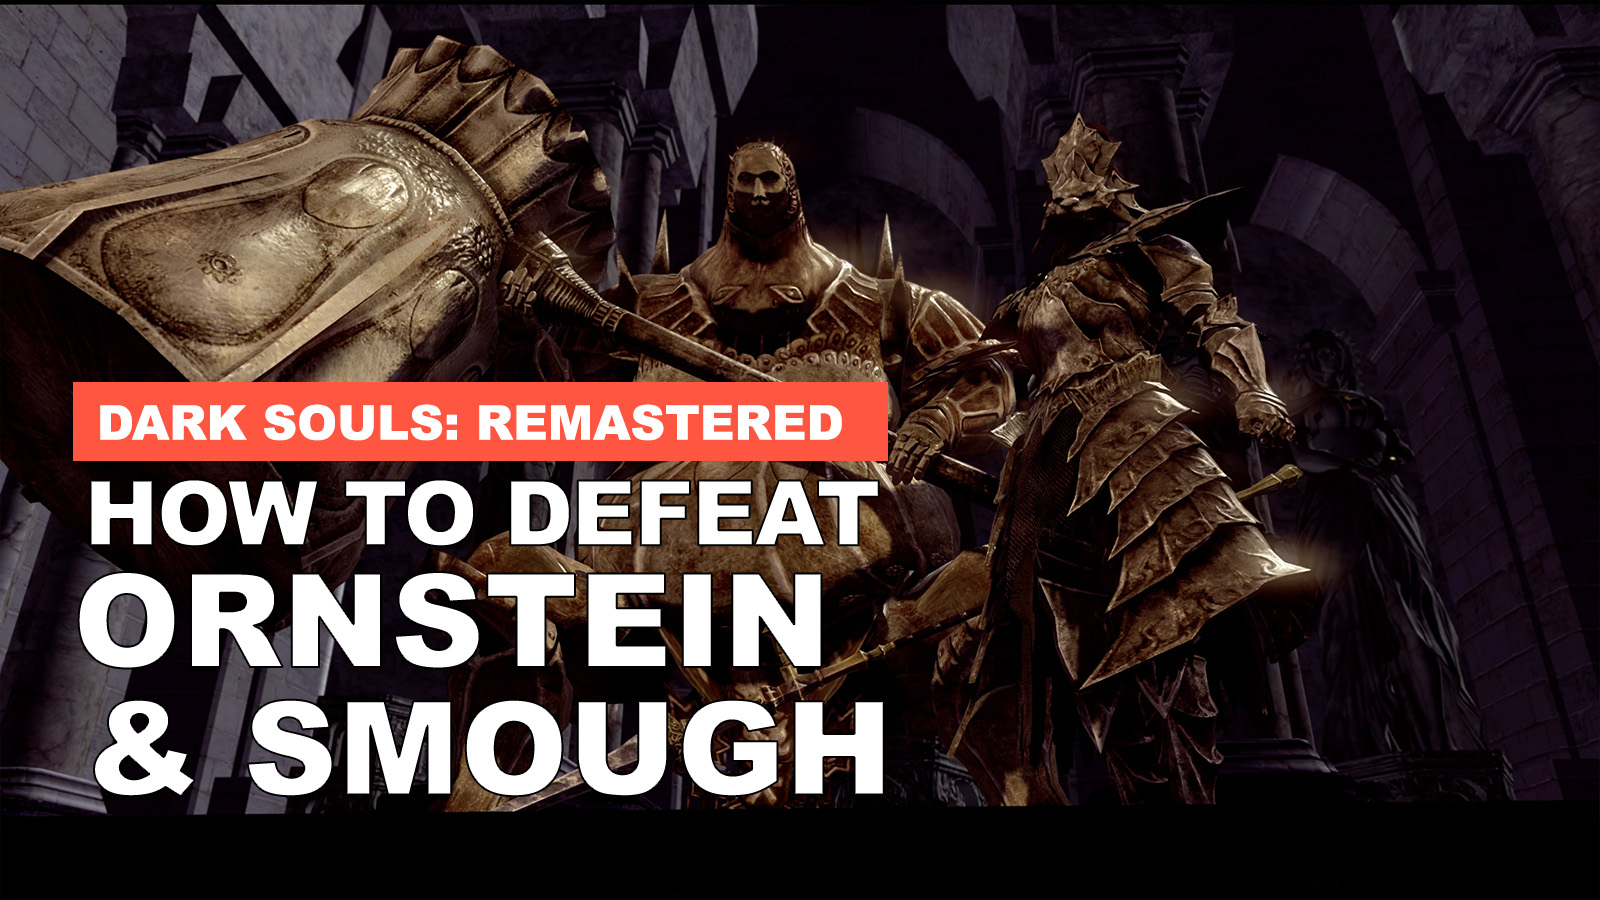 How To Defeat Ornstein And Smough In Dark Souls: Remastered